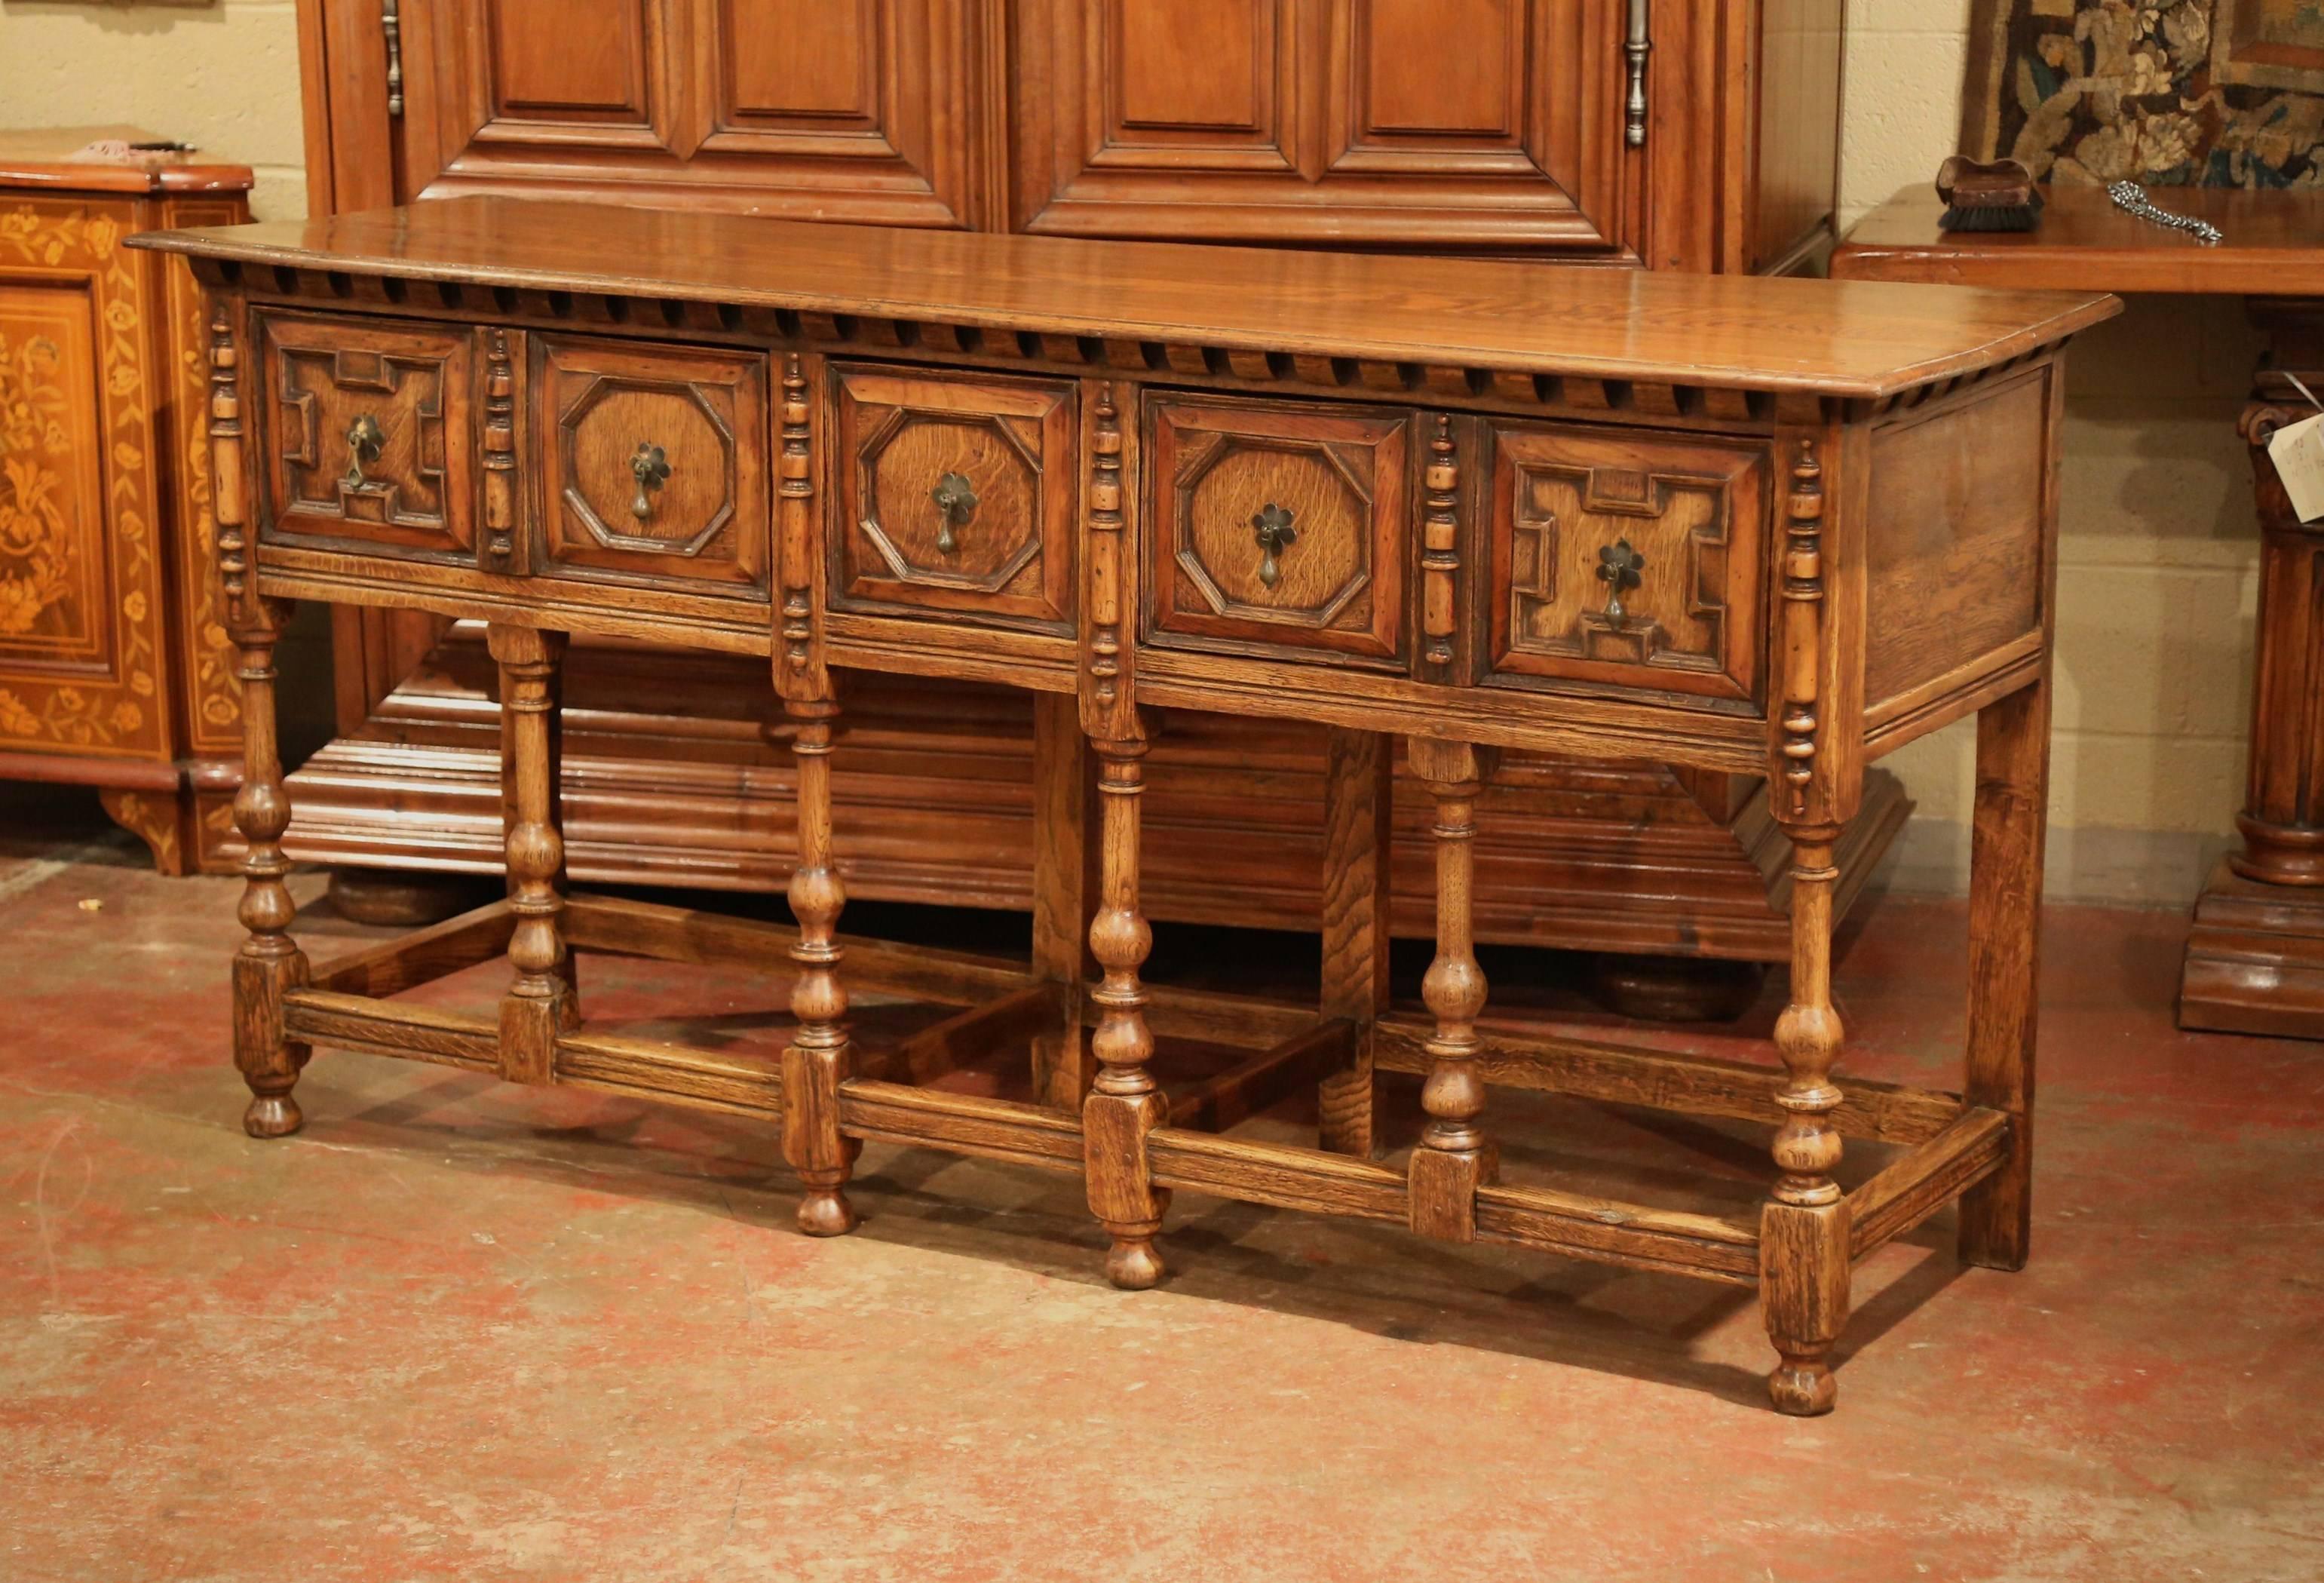 19th Century English Carved Chestnut and Oak Eight-Leg Console Table and Drawers 1